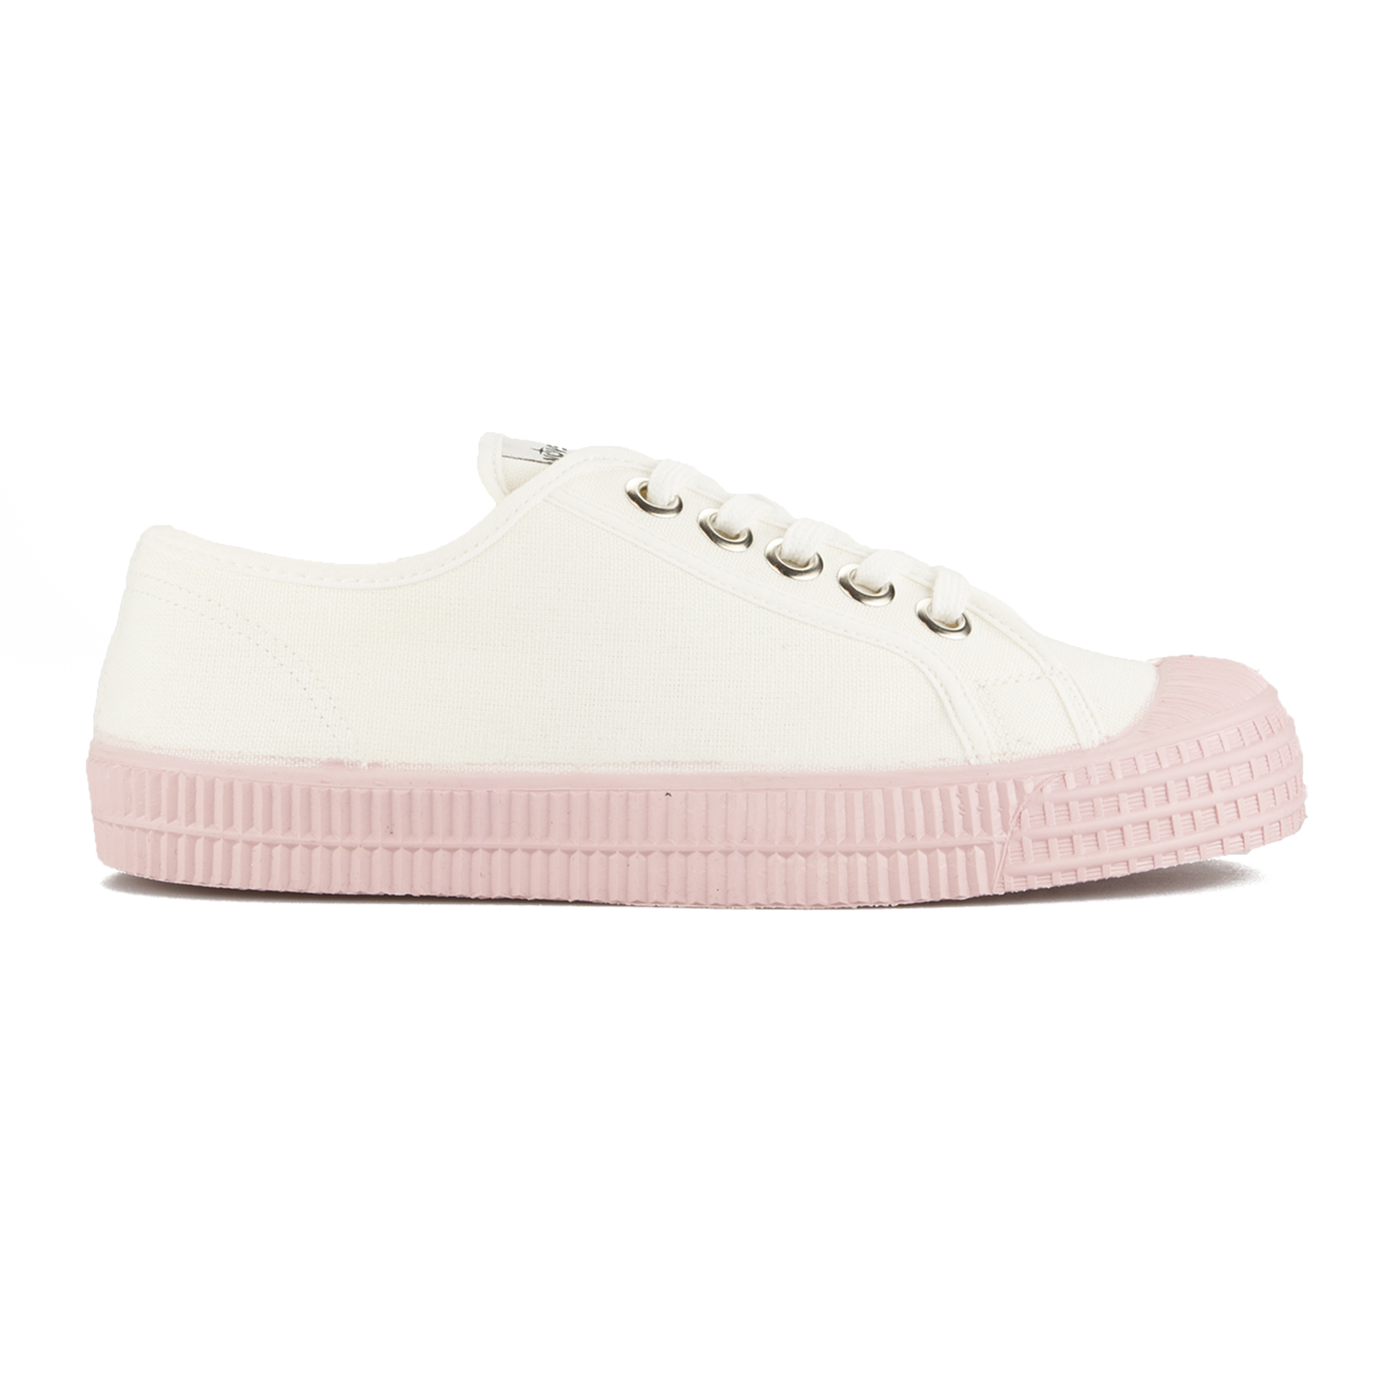 STAR MASTER COLOR SOLE 10WHITE / PINK